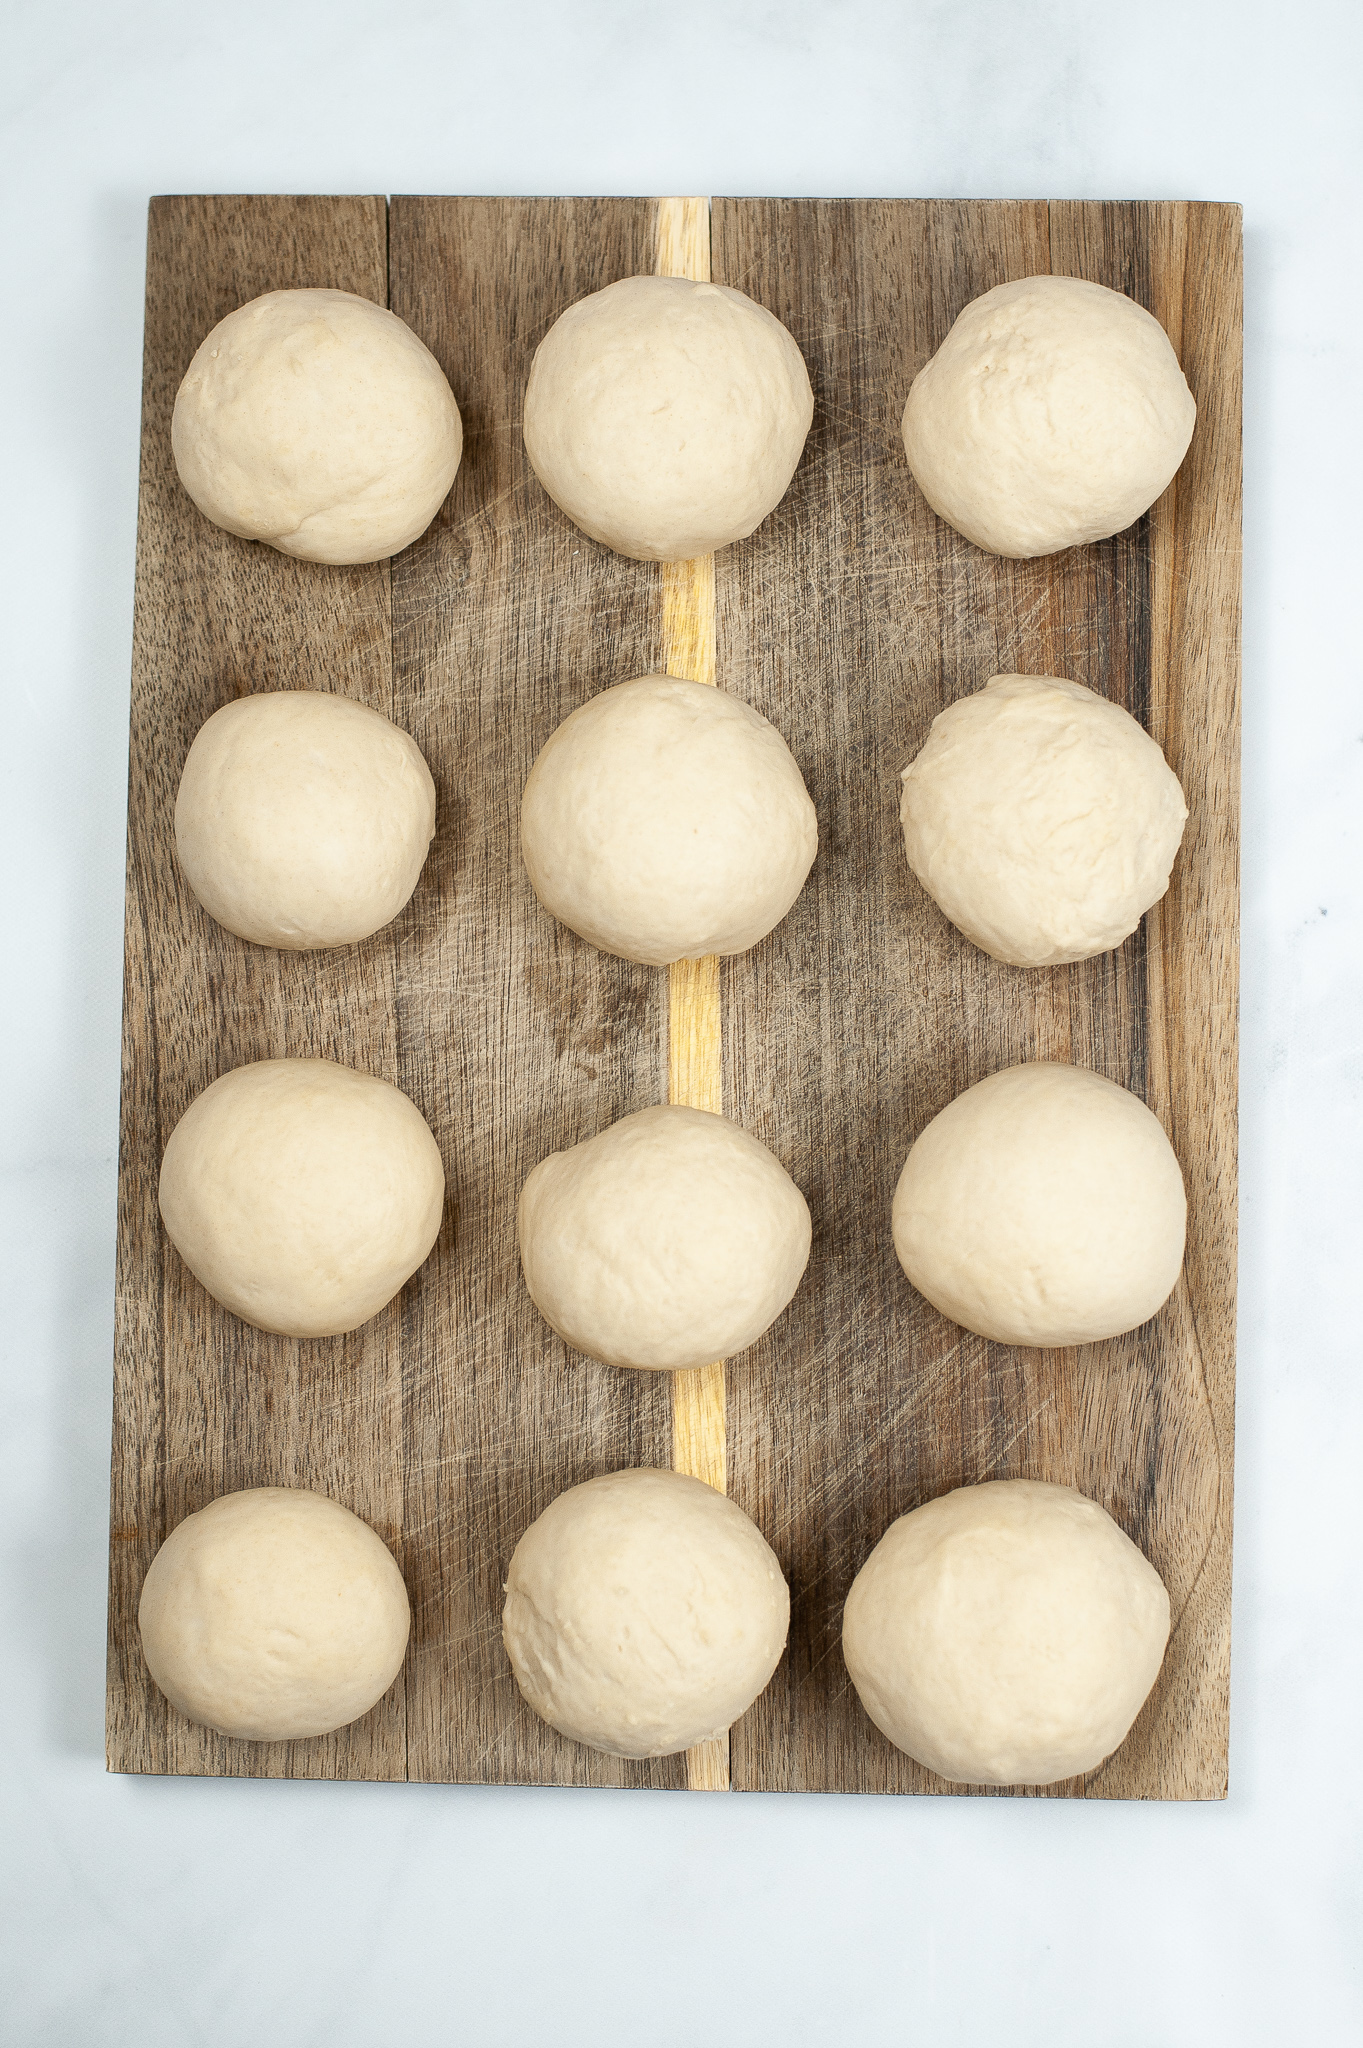 Dough rolled in ball.